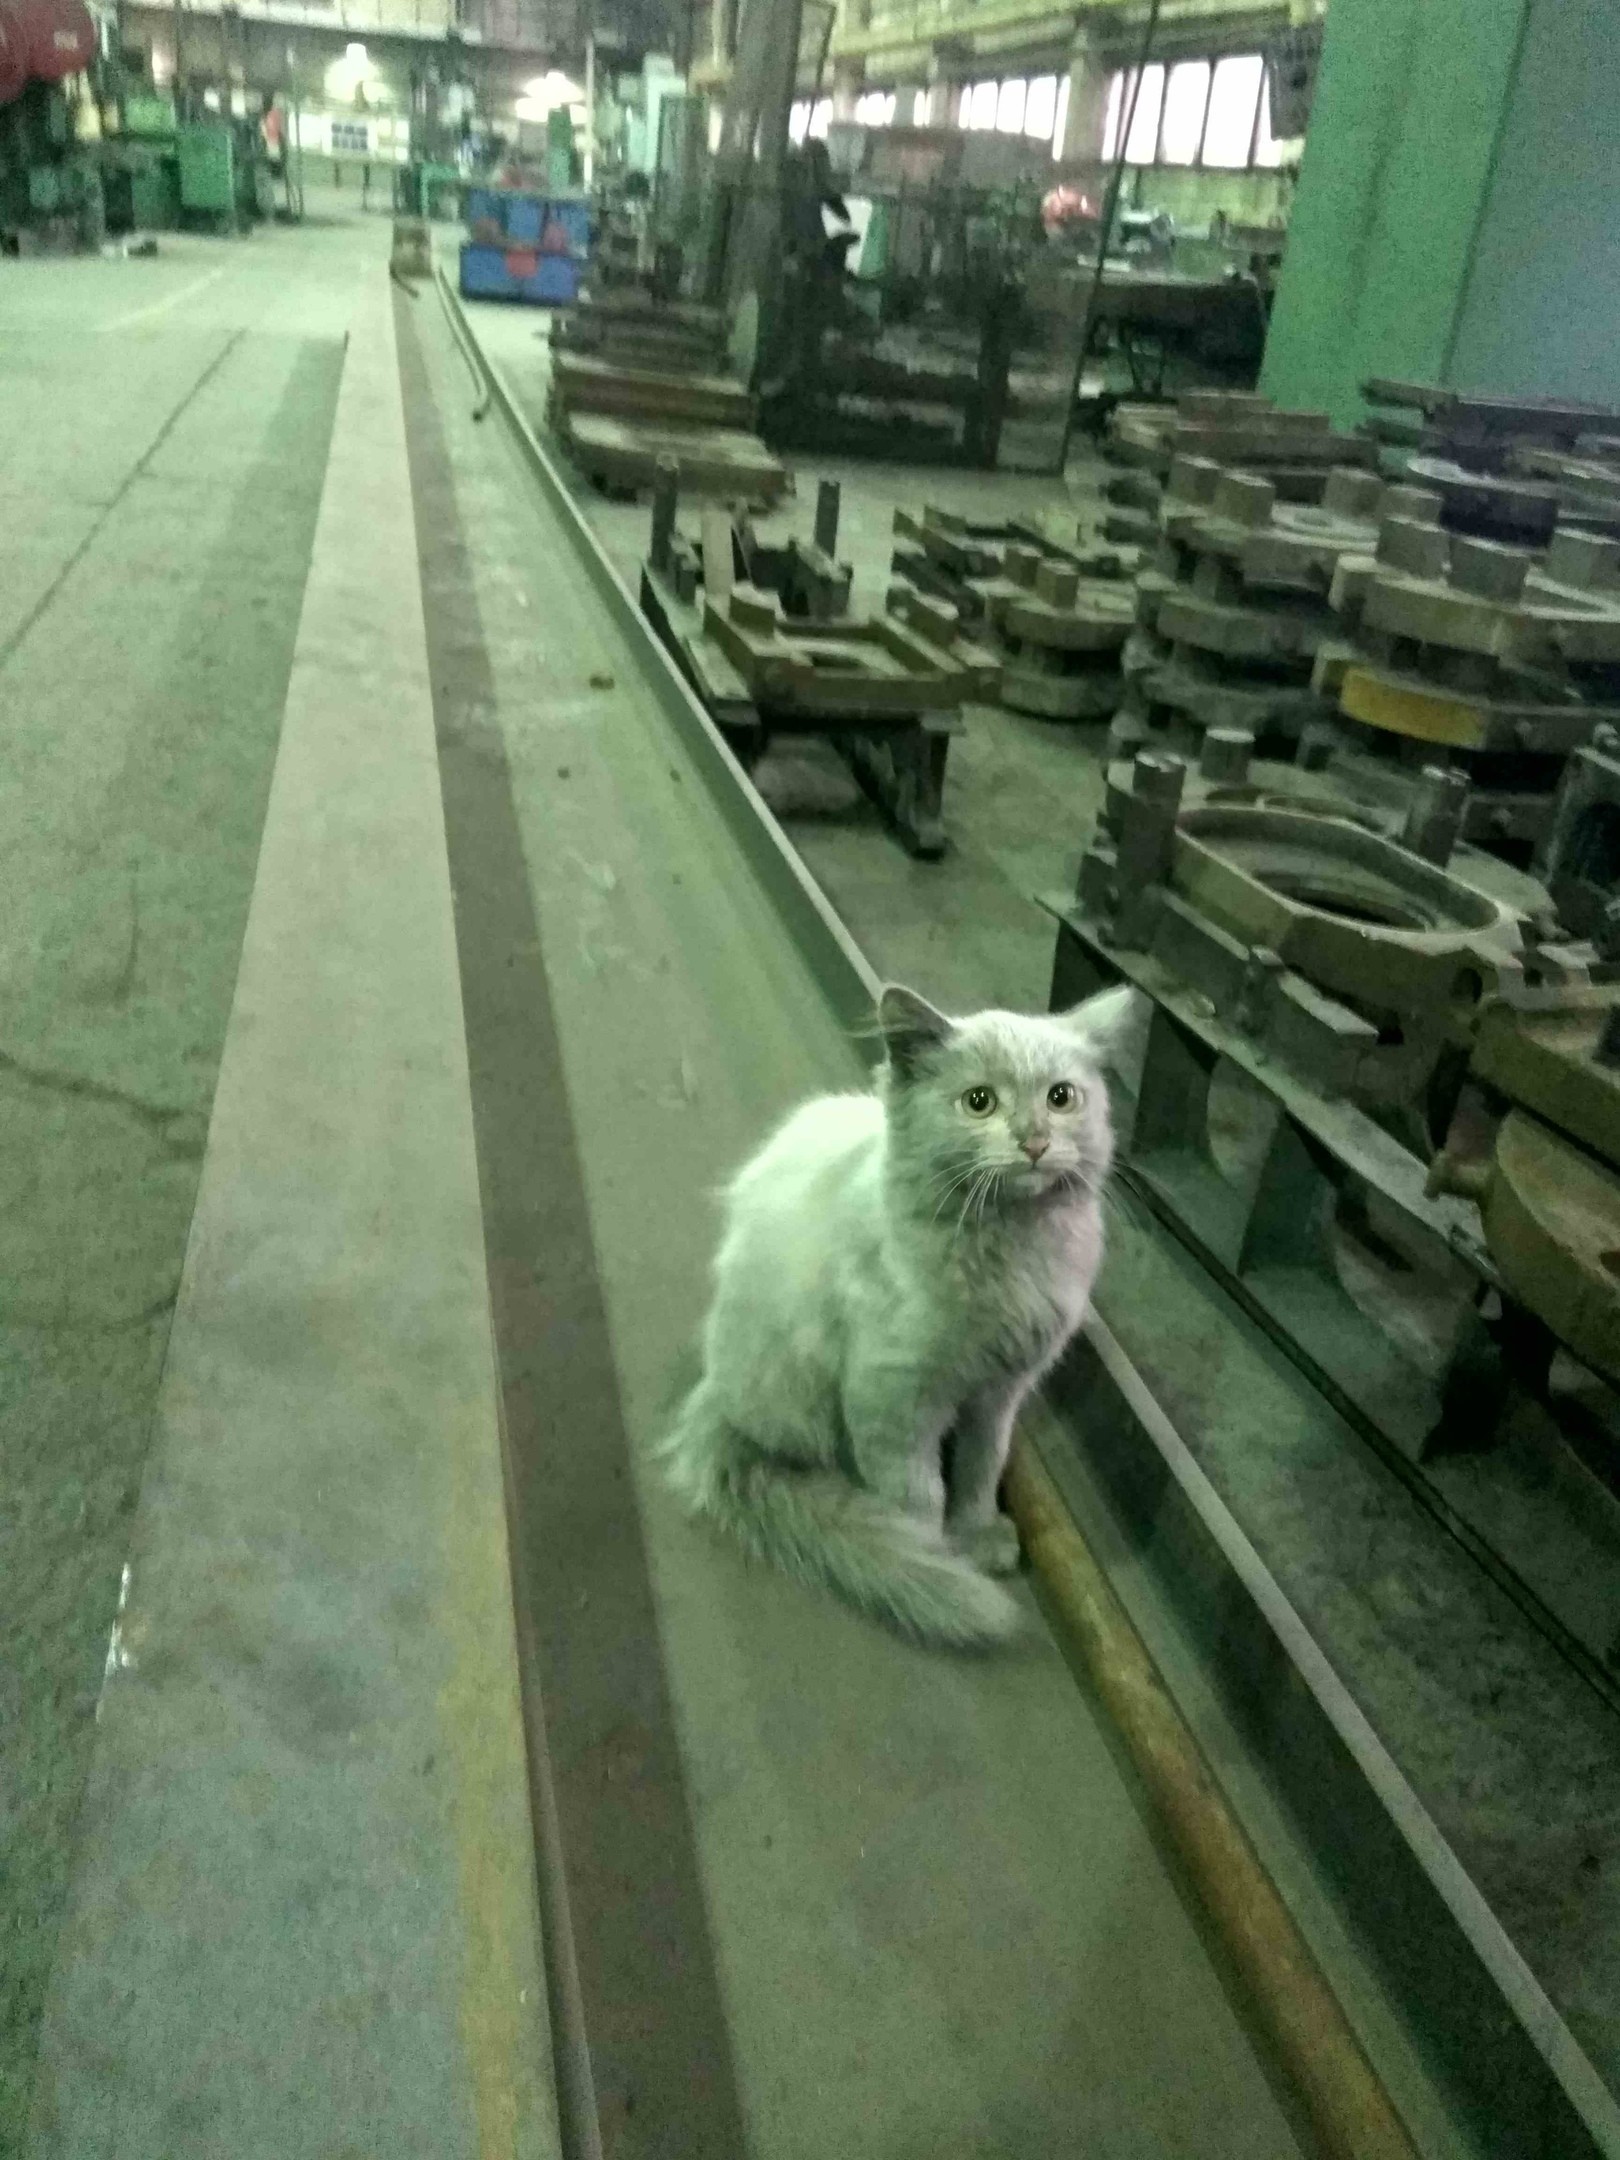 At the factory - Factory, cat